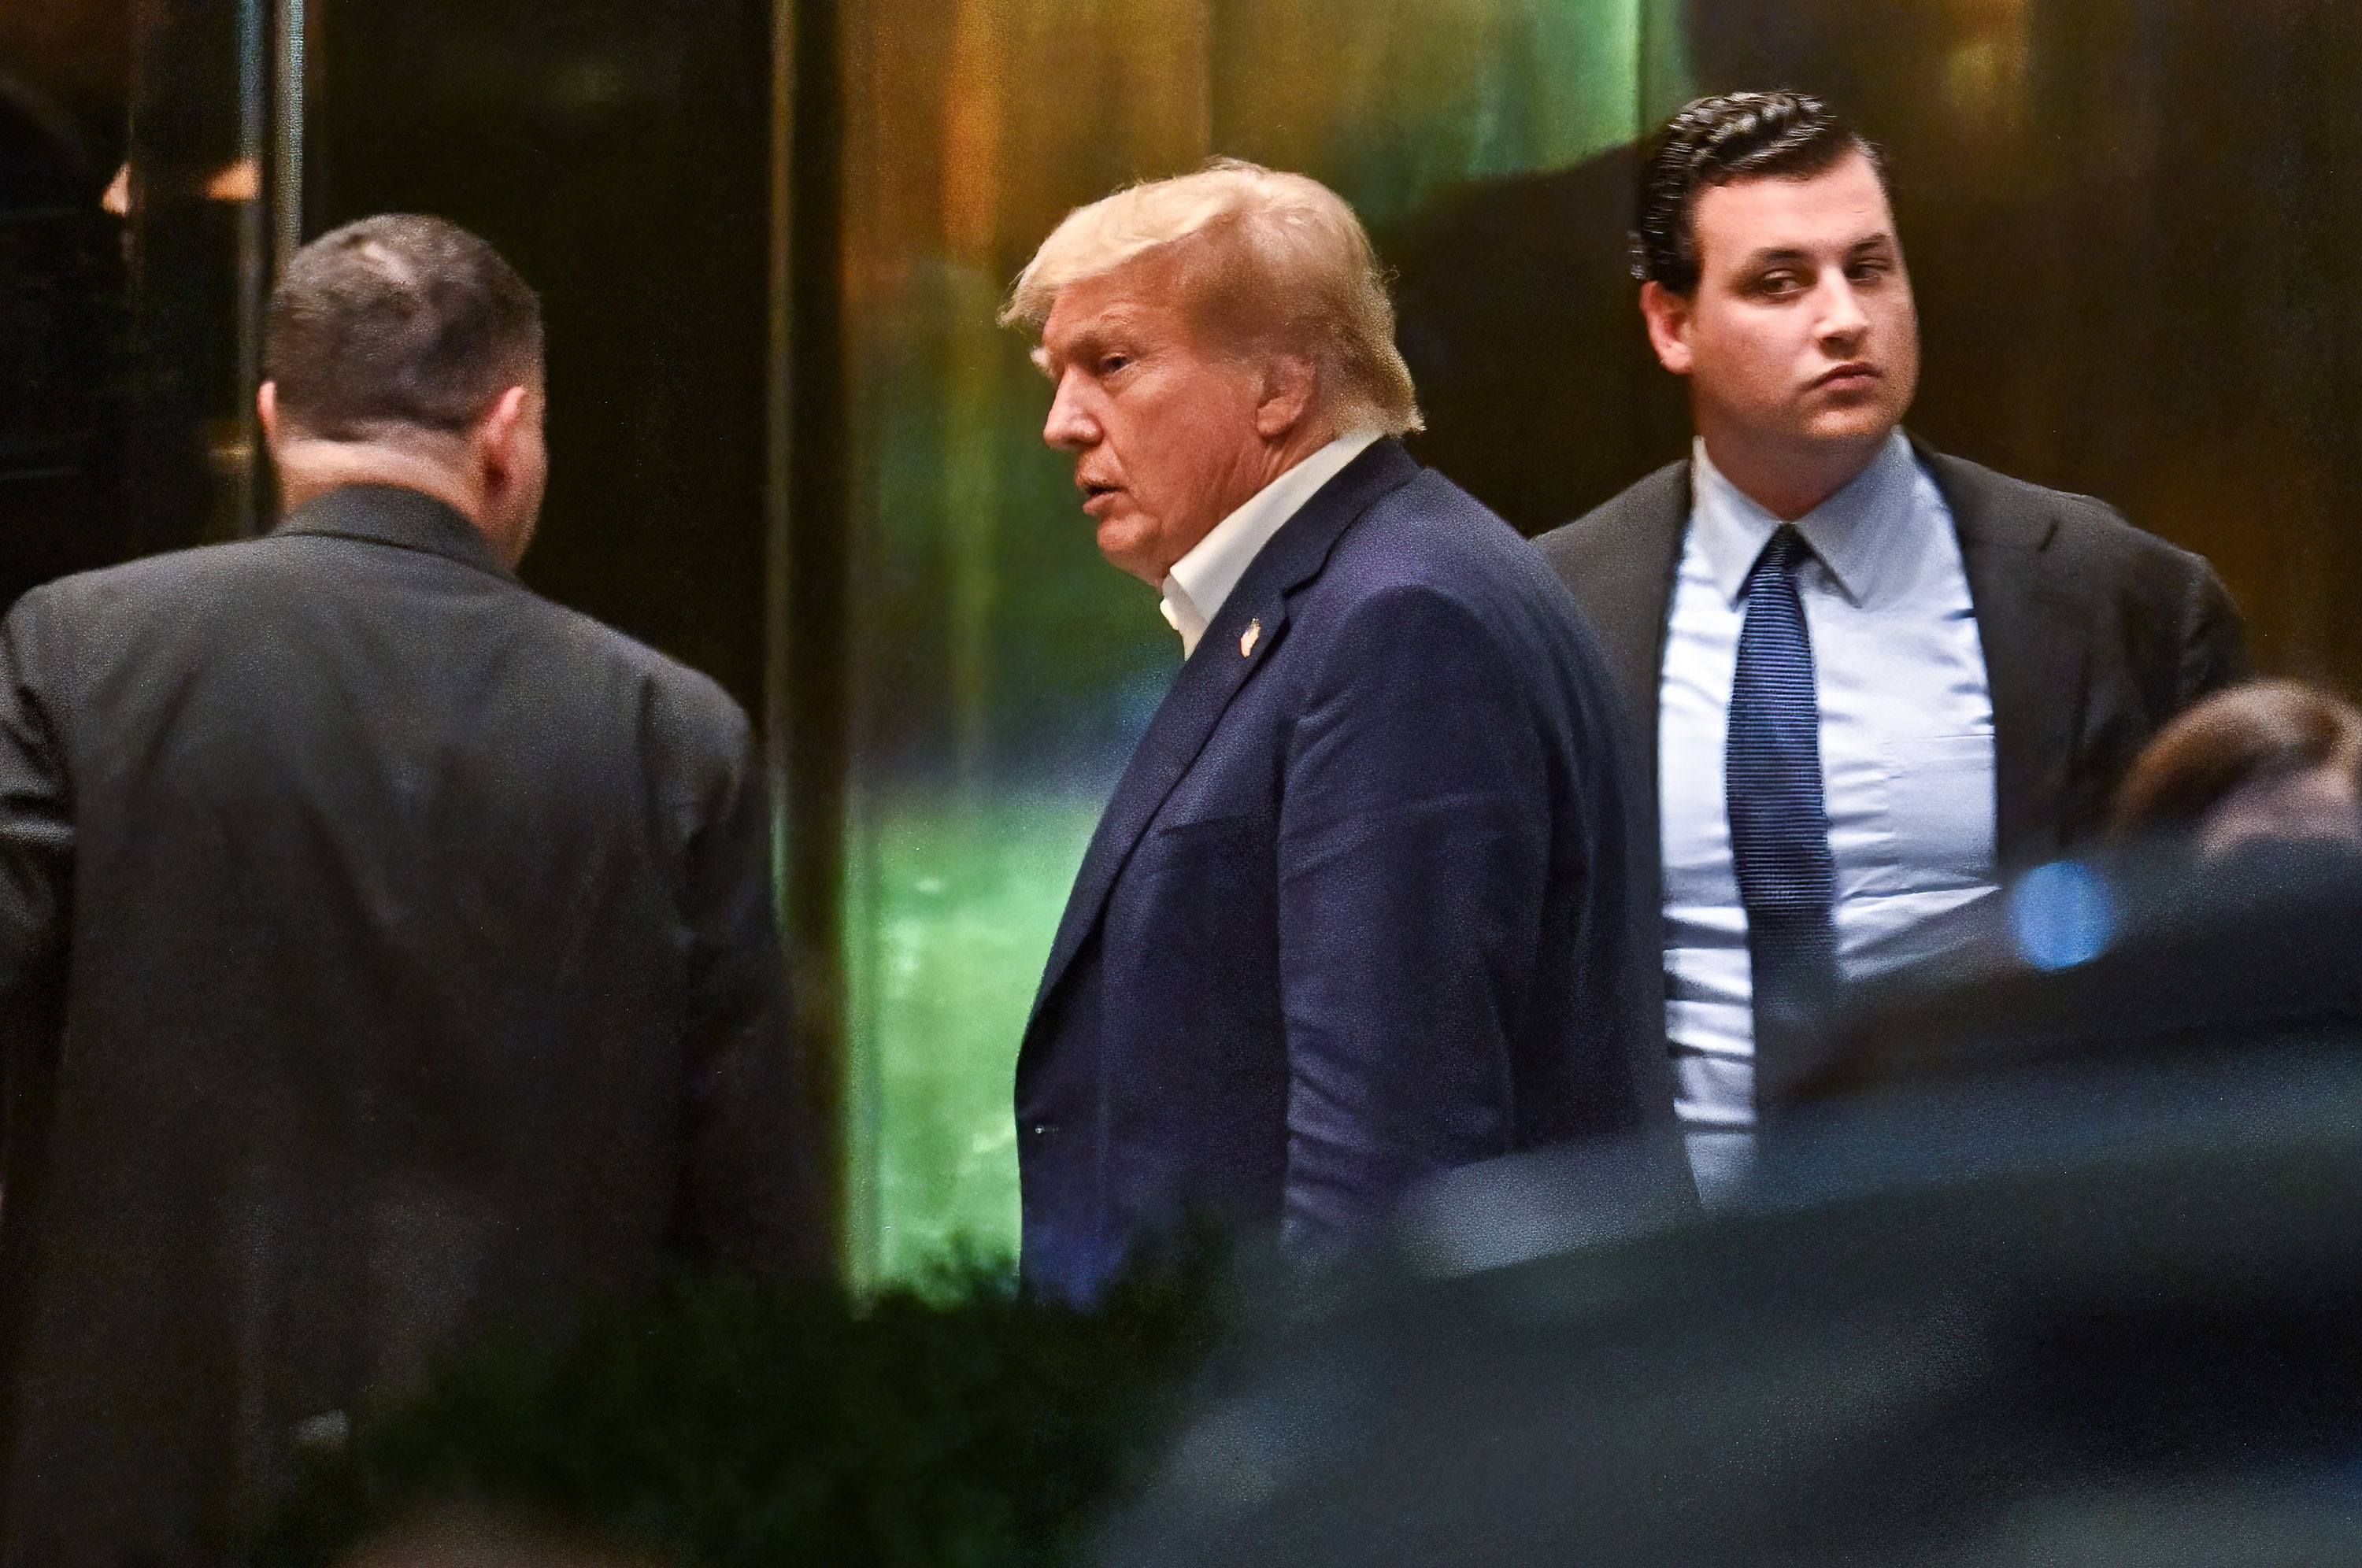 Former President Donald Trump arrives at Trump Tower in New York on Sunday evening.